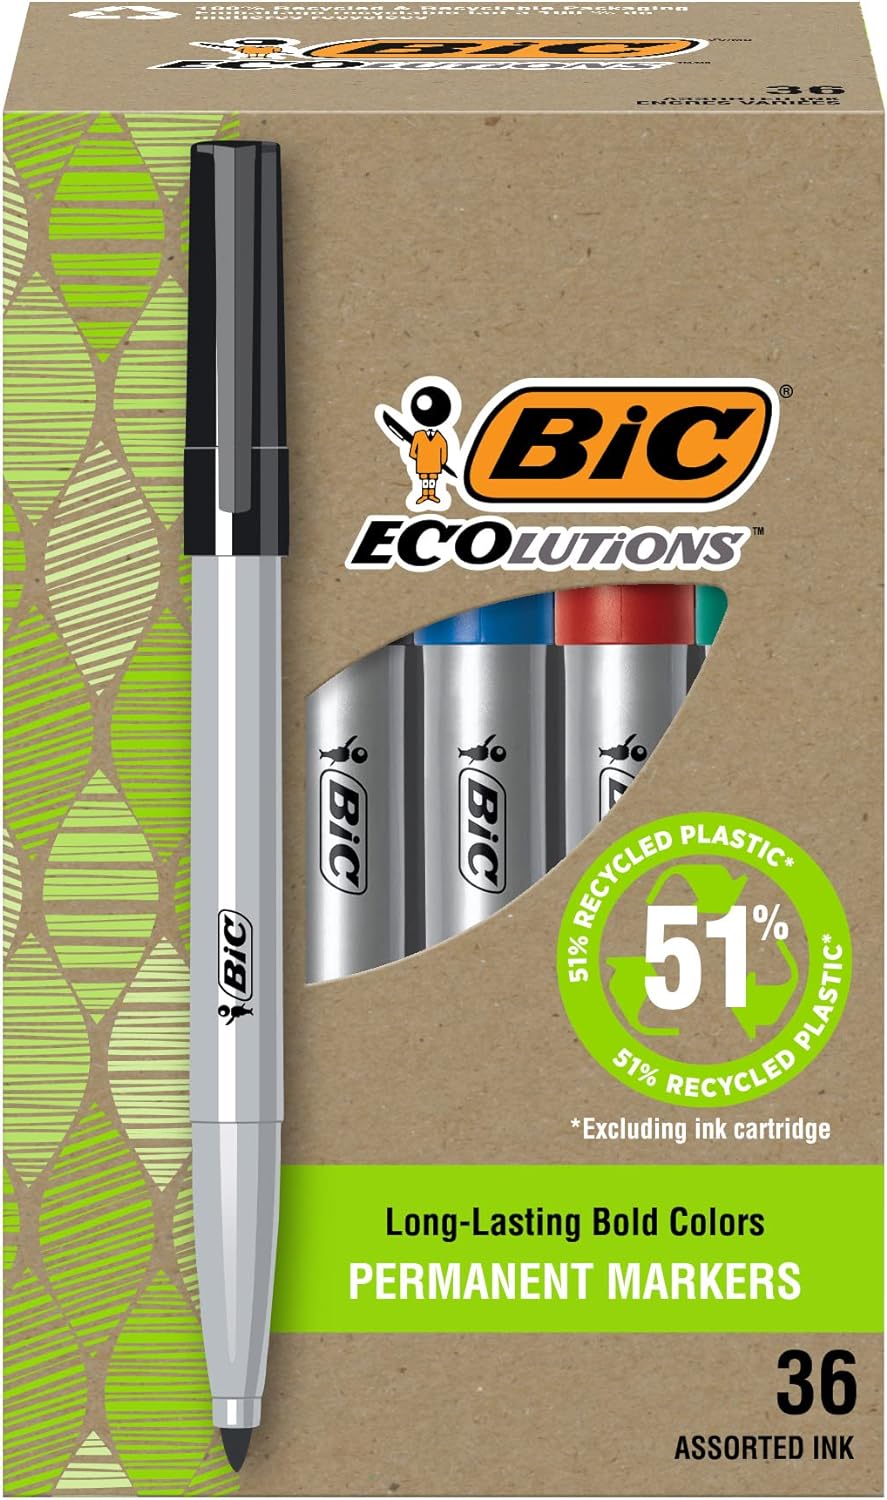 BIC Ecolutions Fine Permanent Markers, Fine Bullet Tip, 36-Count Pack of Assorted Colors, Marker Set Made from 51% Recycled Plastic Excluding Ink Cartridge